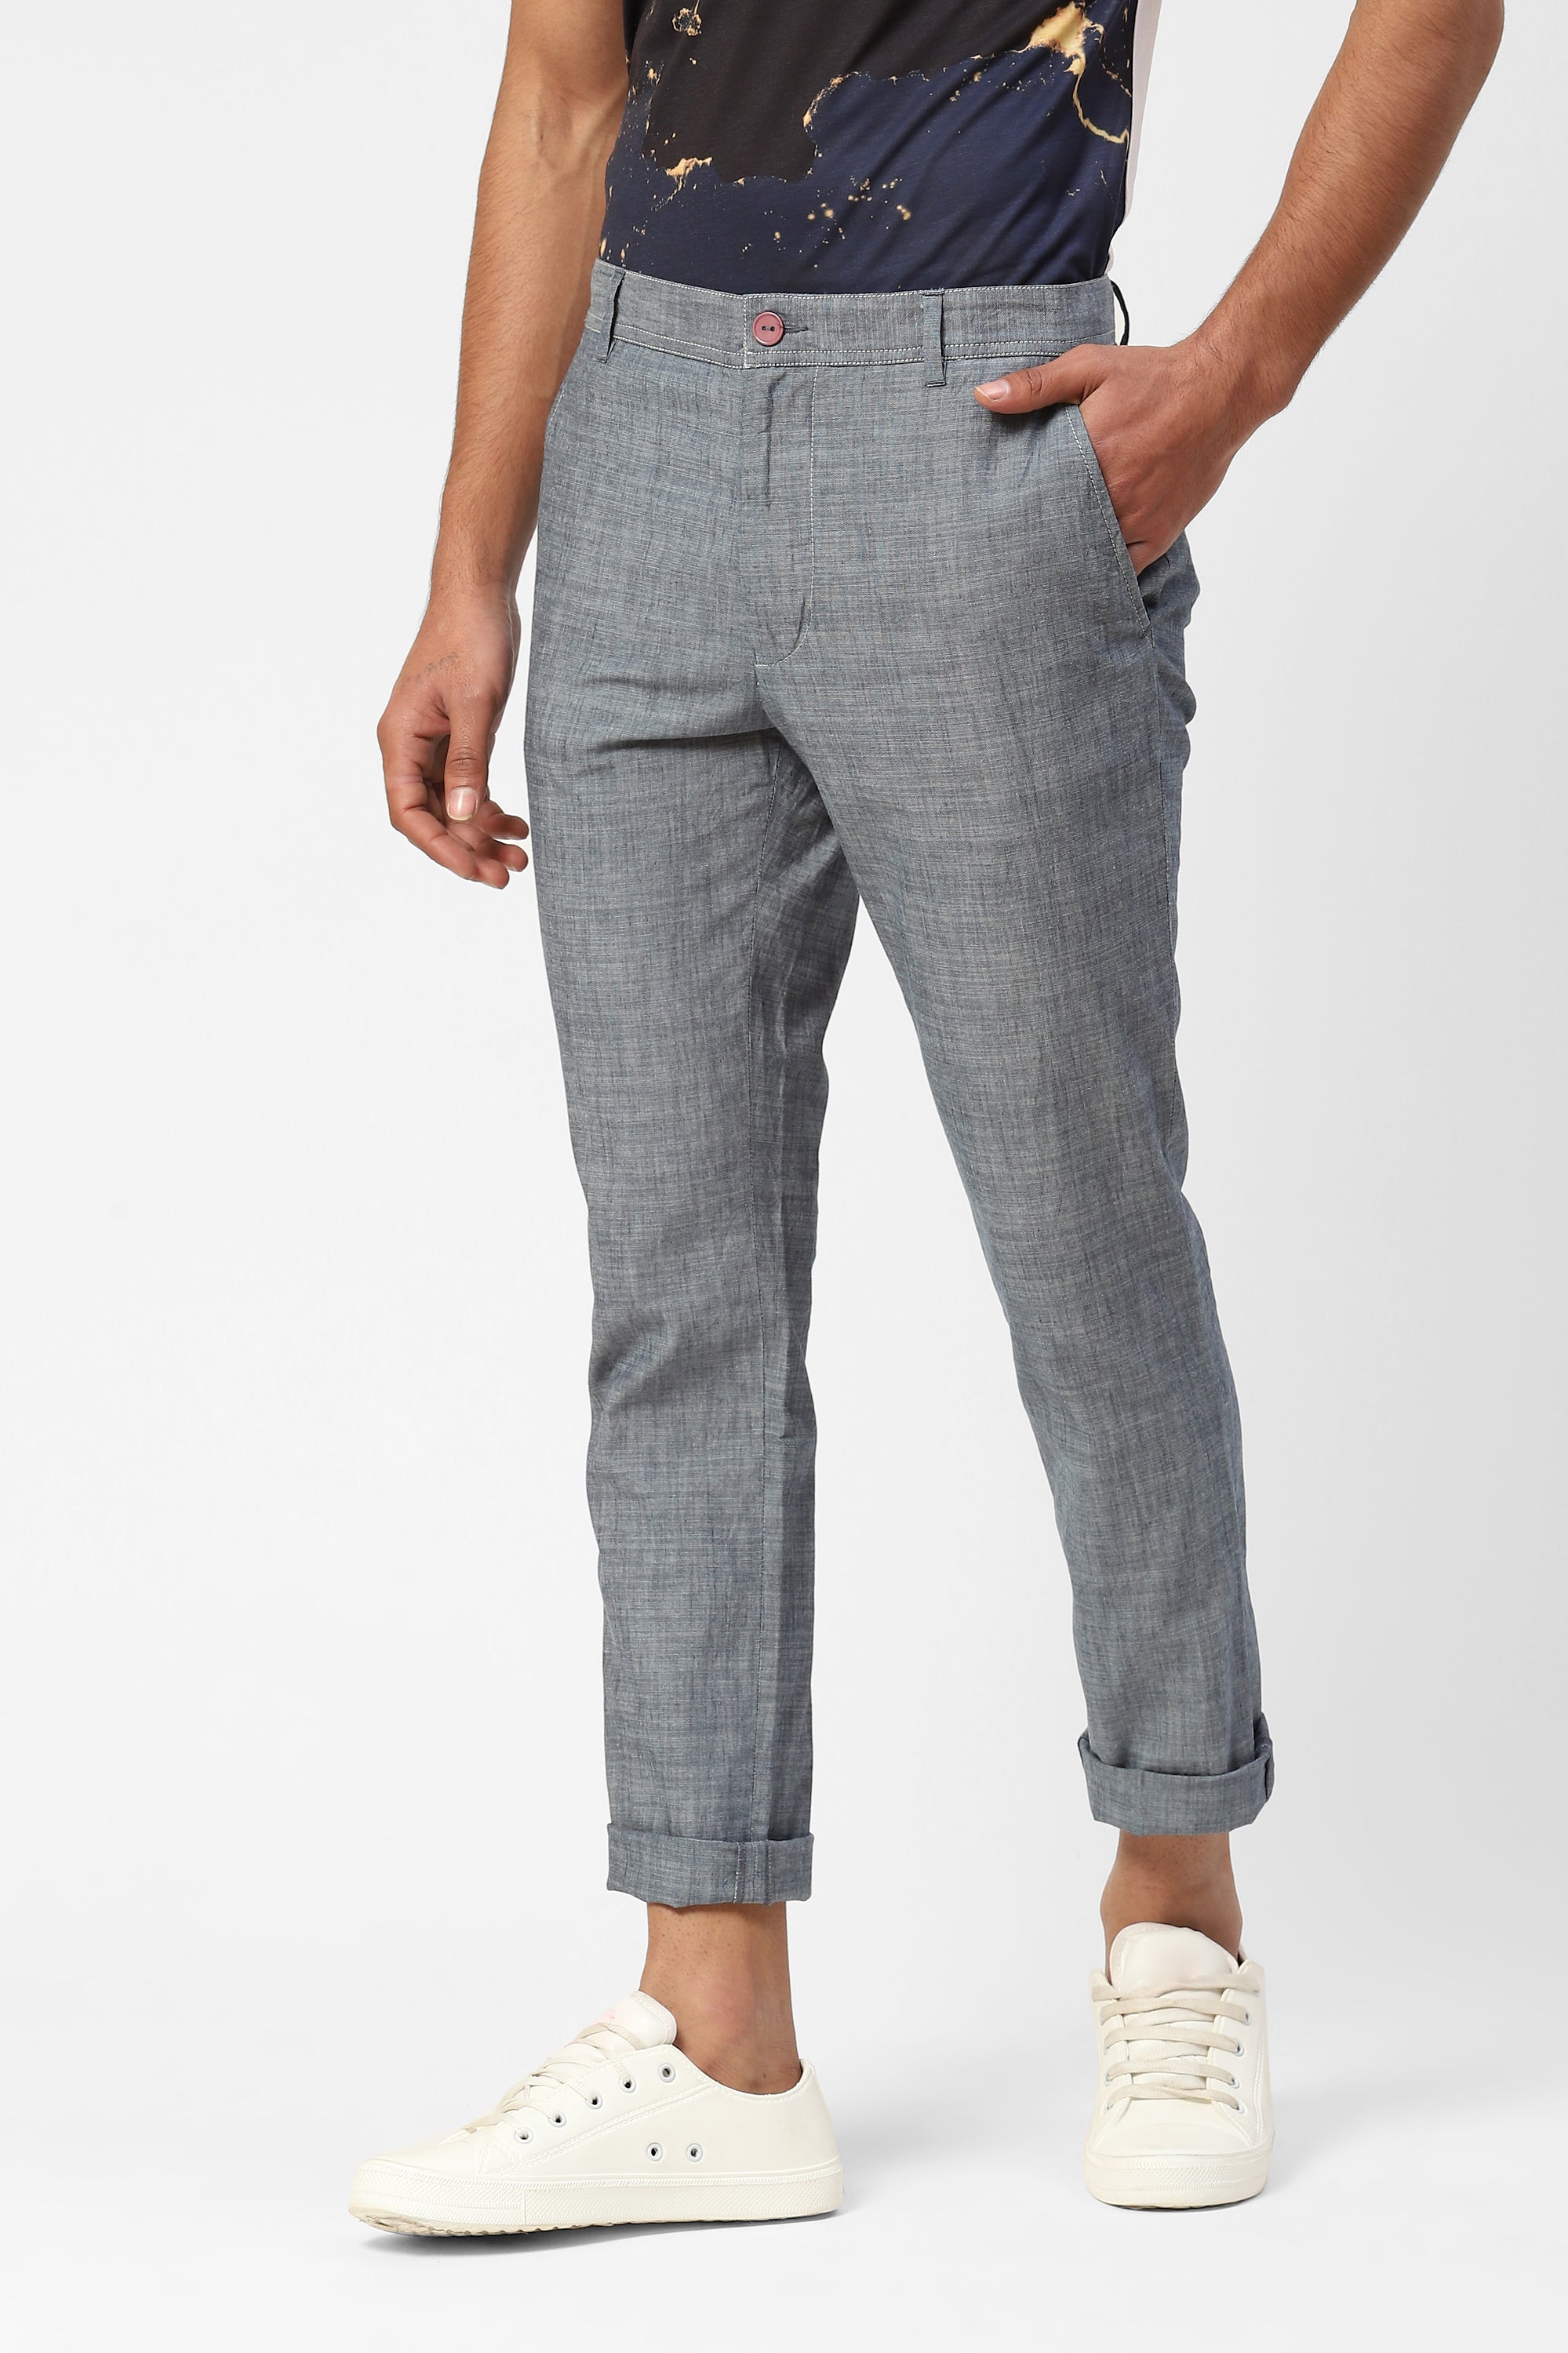 Blue Grey Chambray Cotton Trousers For Men